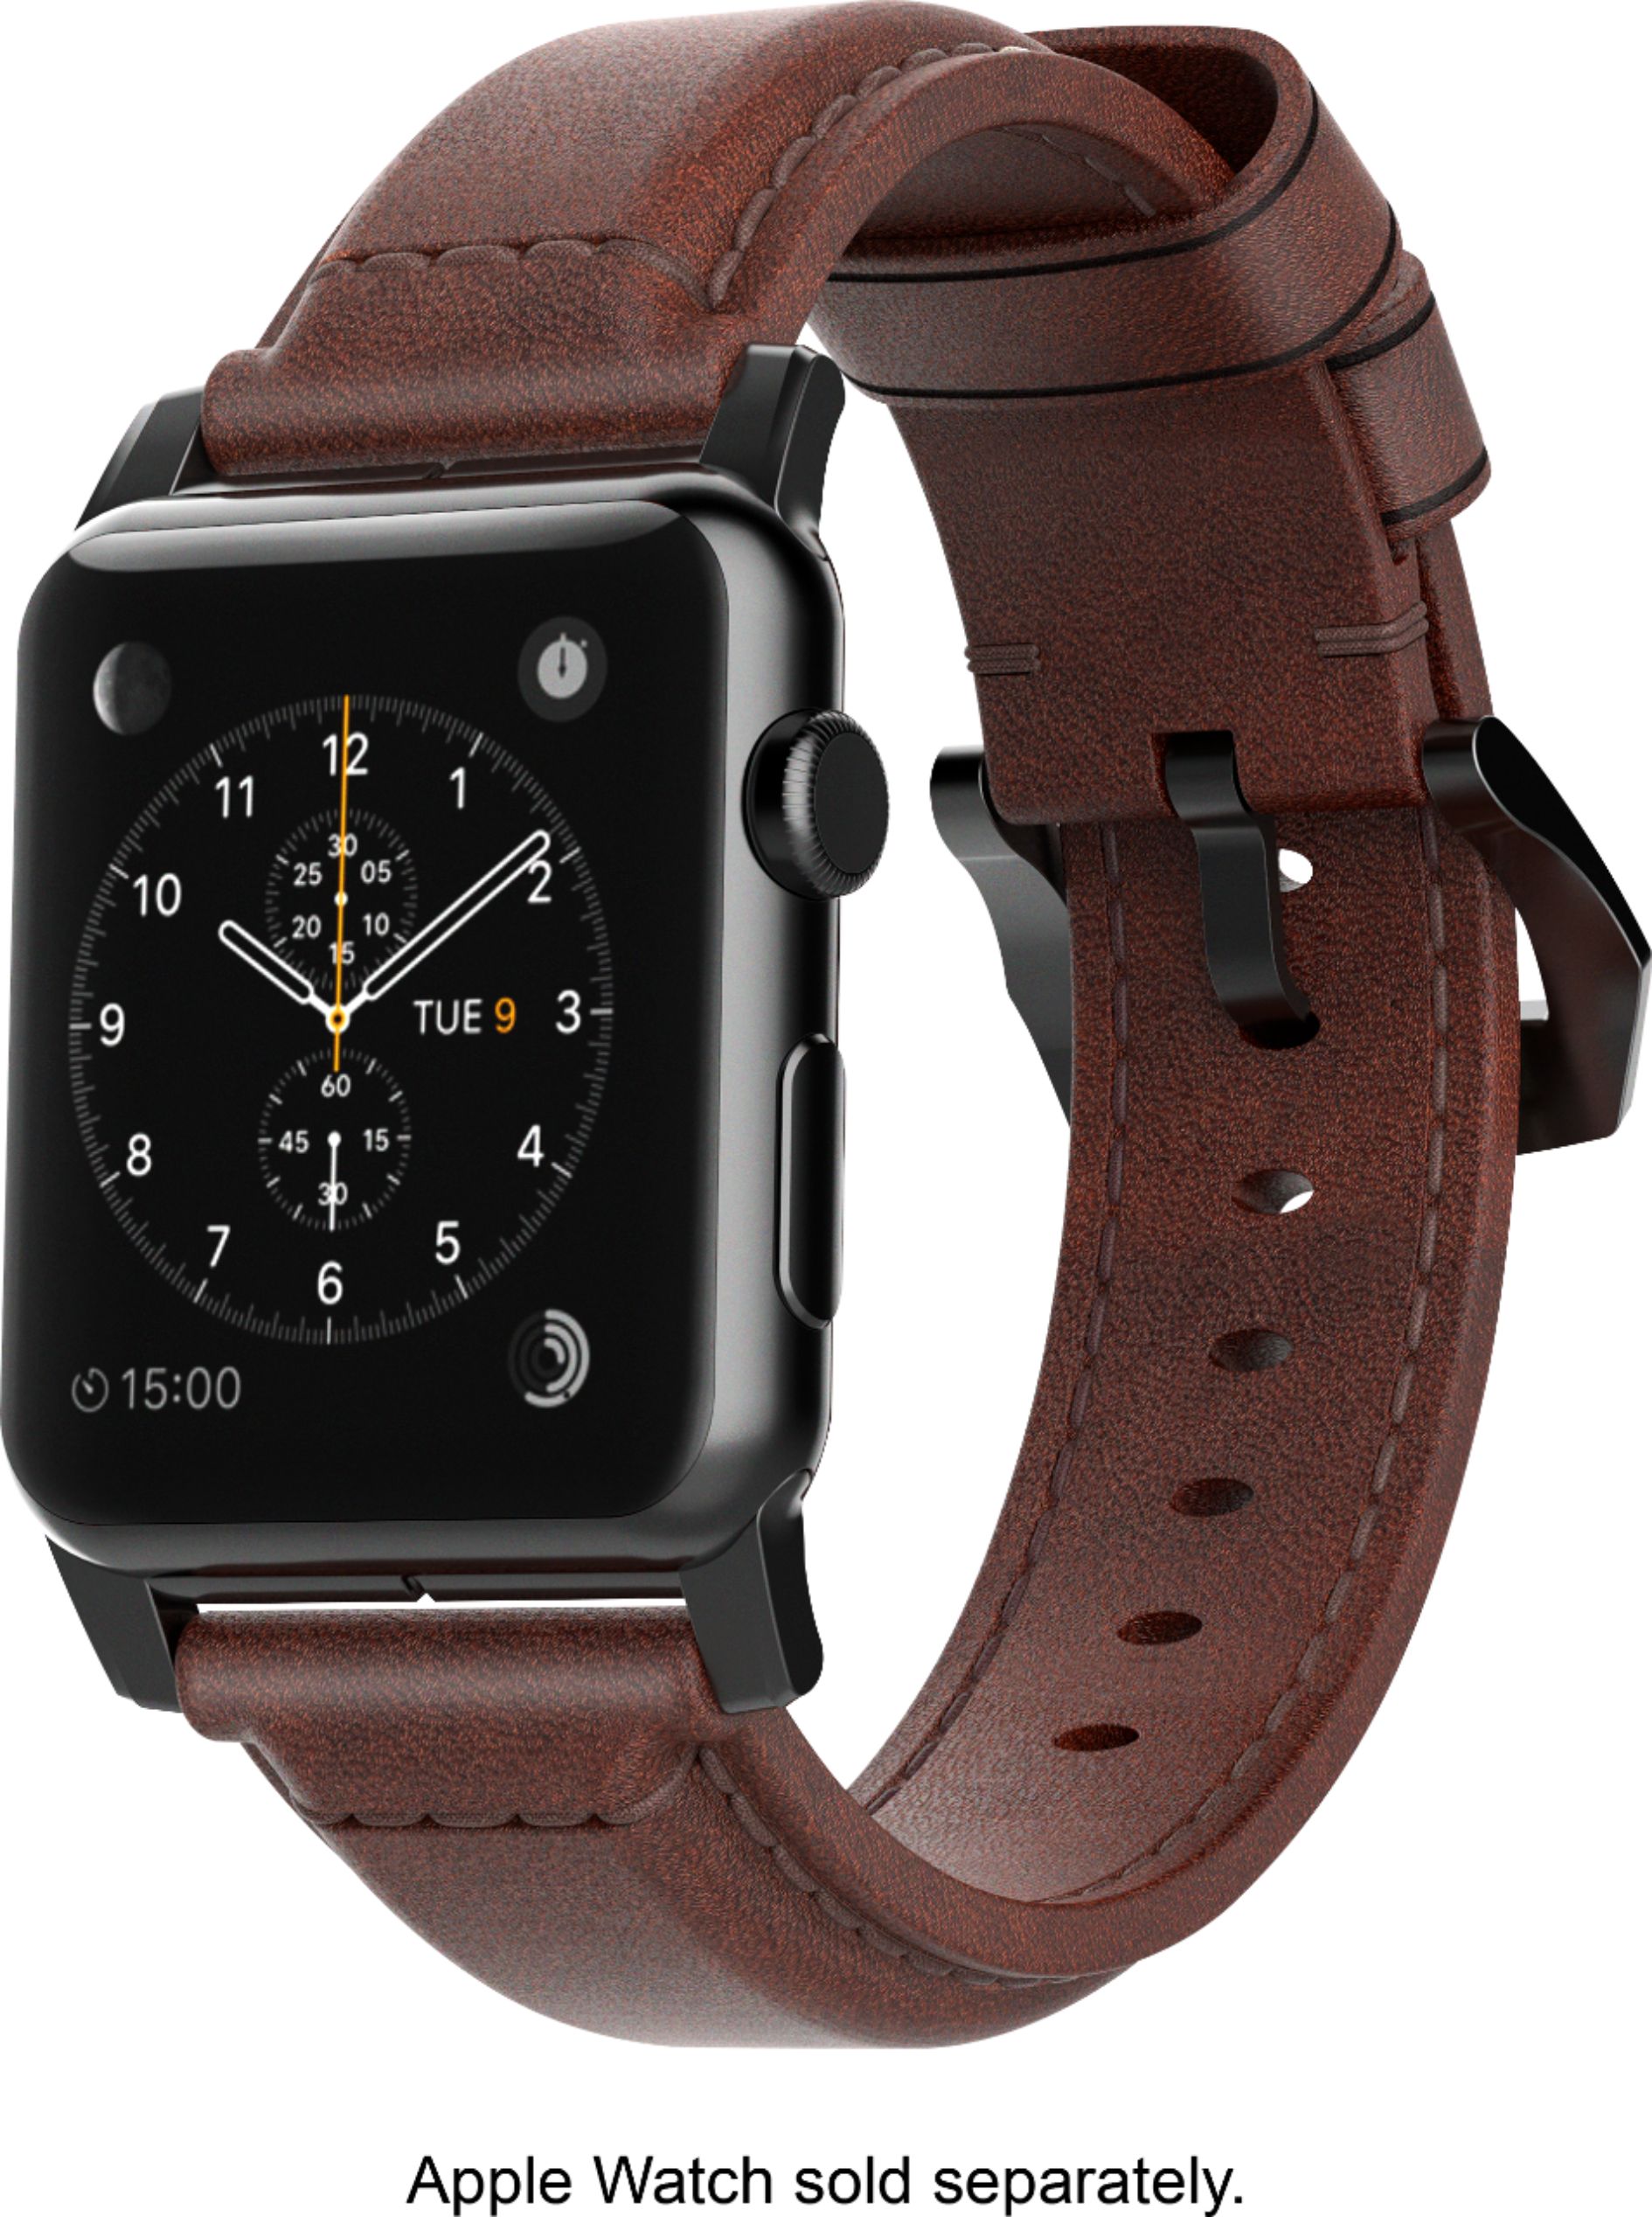  (Native American Indian Tribal Chief) Patterned Leather  Wristband Strap for Apple Watch Series 4/3/2/1 gen,Replacement for iWatch  42mm / 44mm Bands : Sports & Outdoors